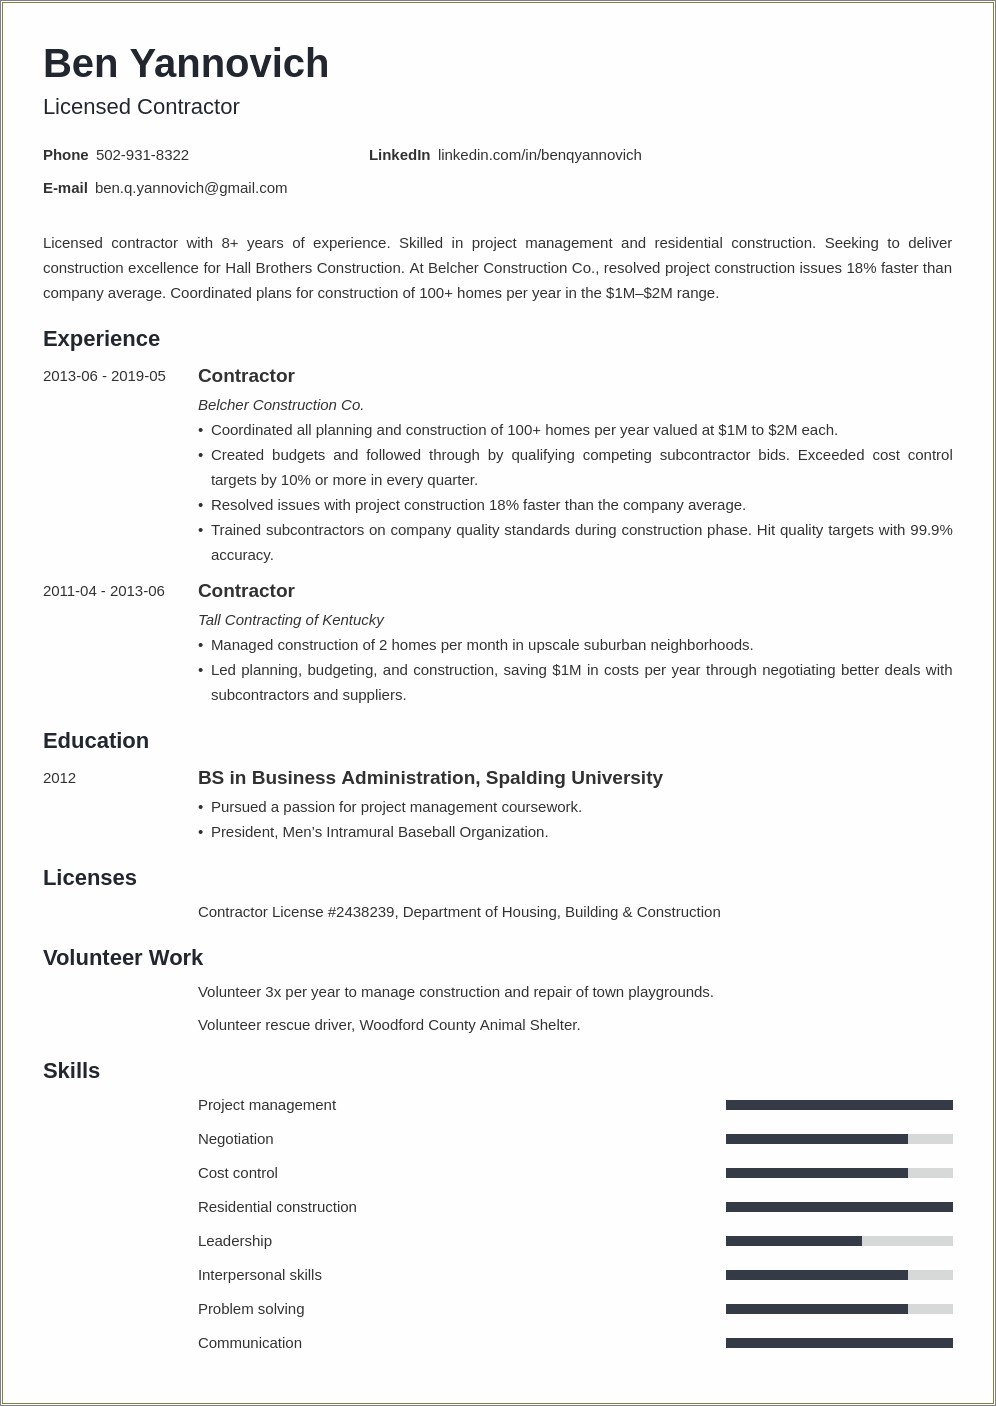 Resume Working As A Contractor Through Staffing Agency